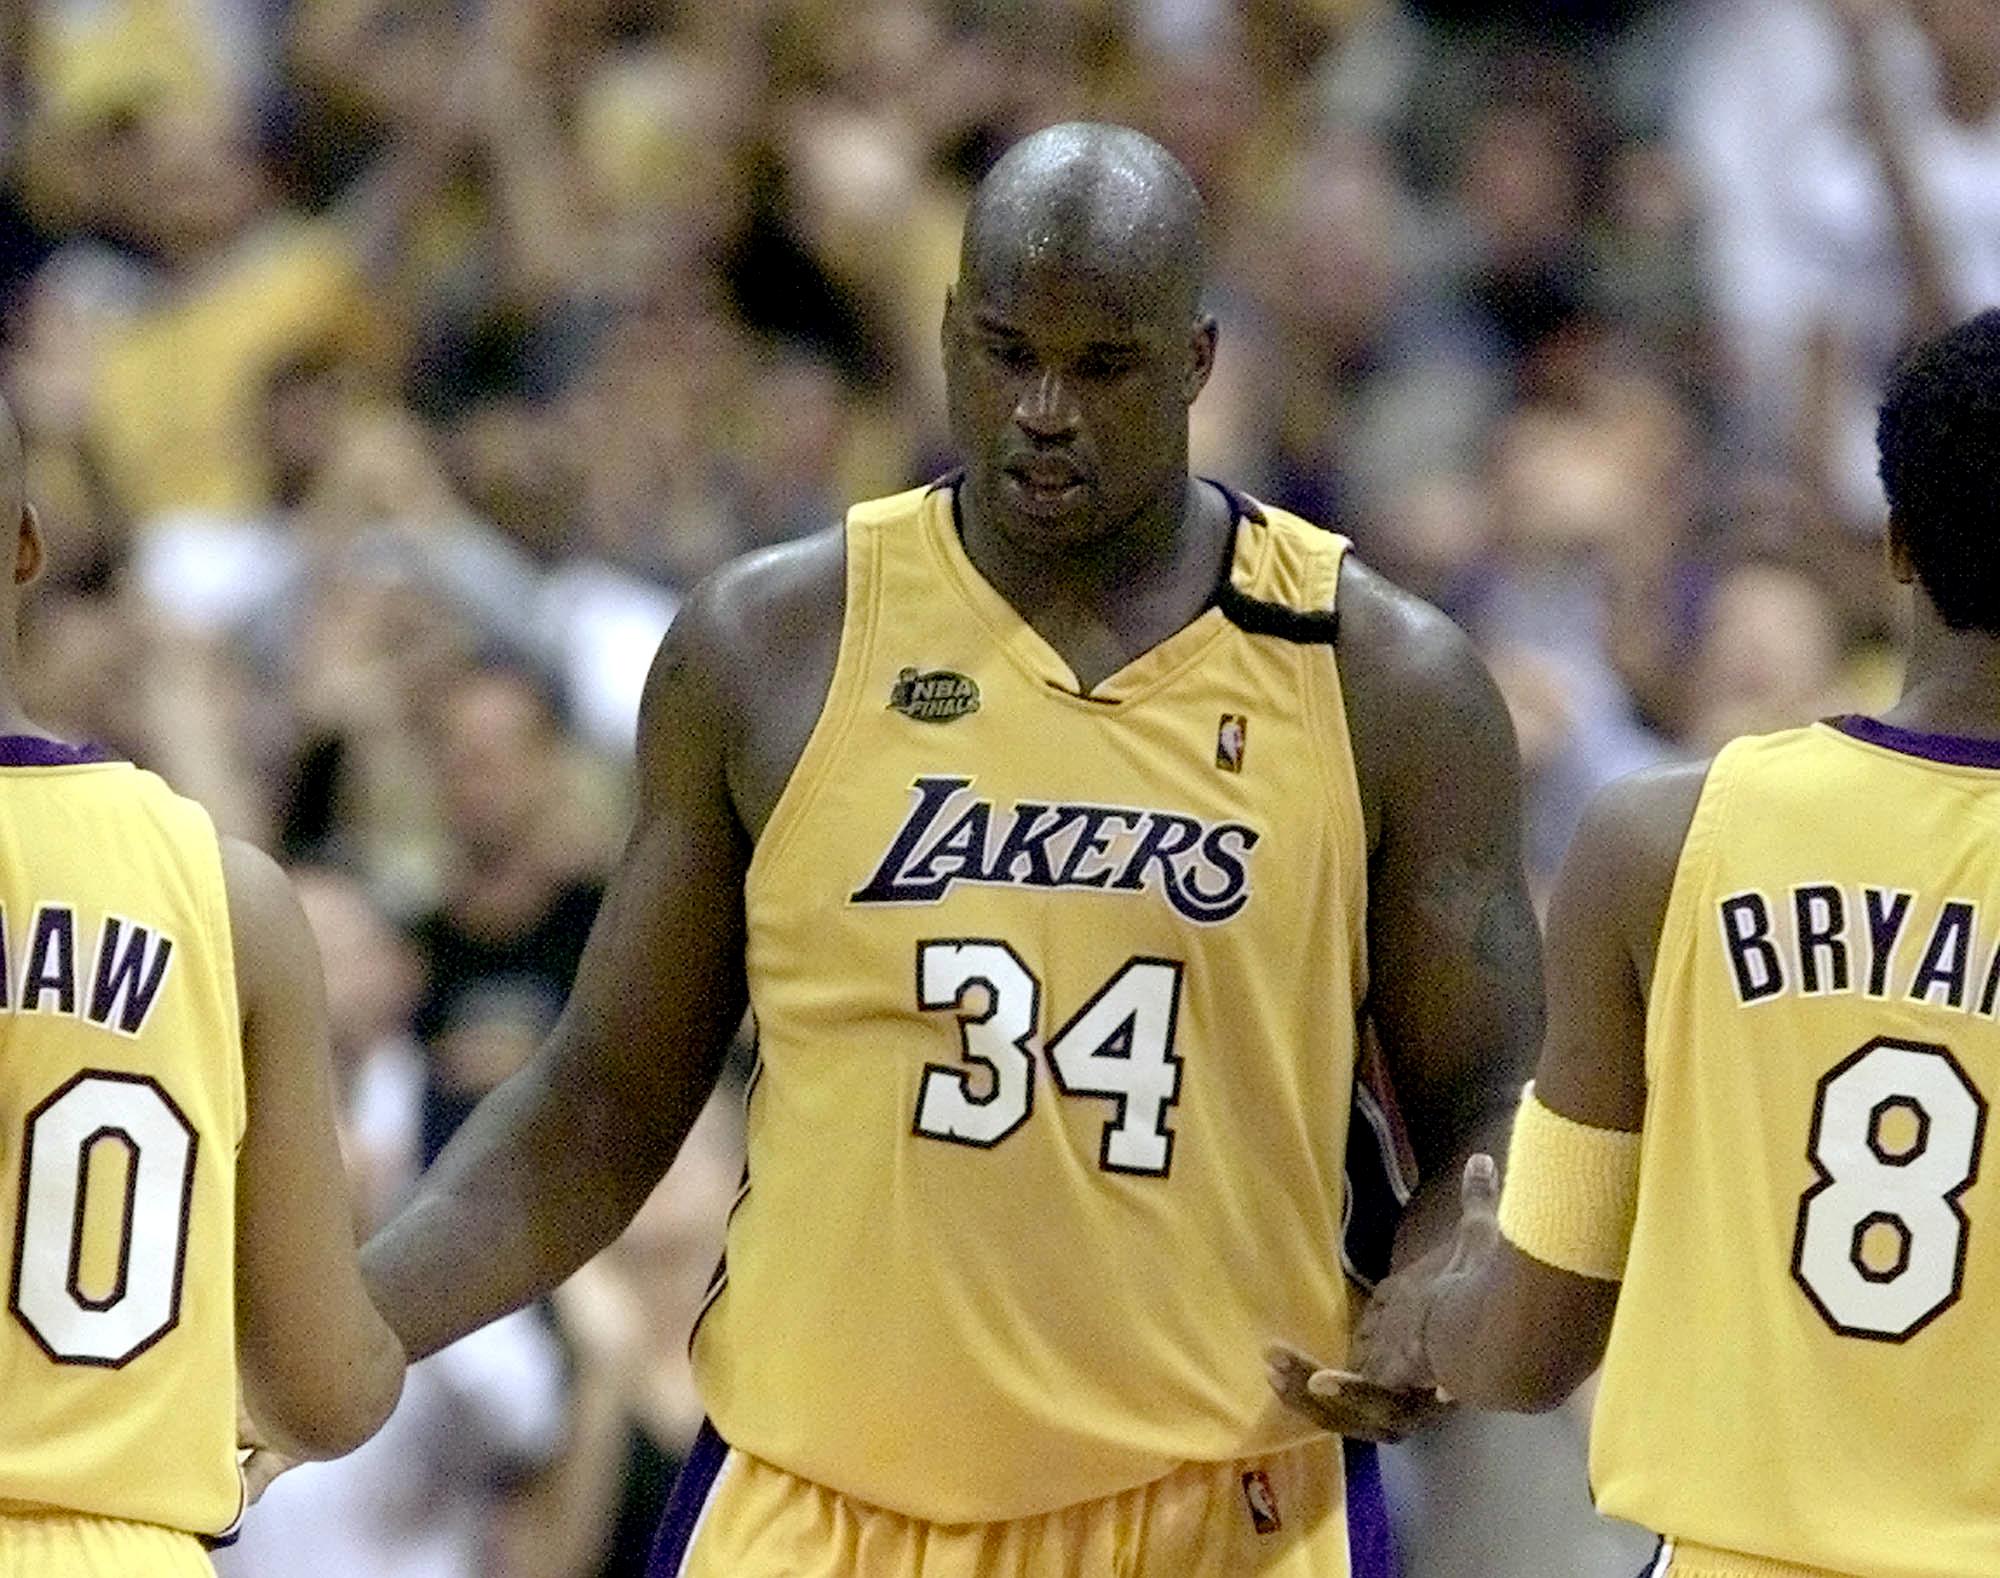 Shaquille O'Neal may have developed his toughess from his mother when he was 2.